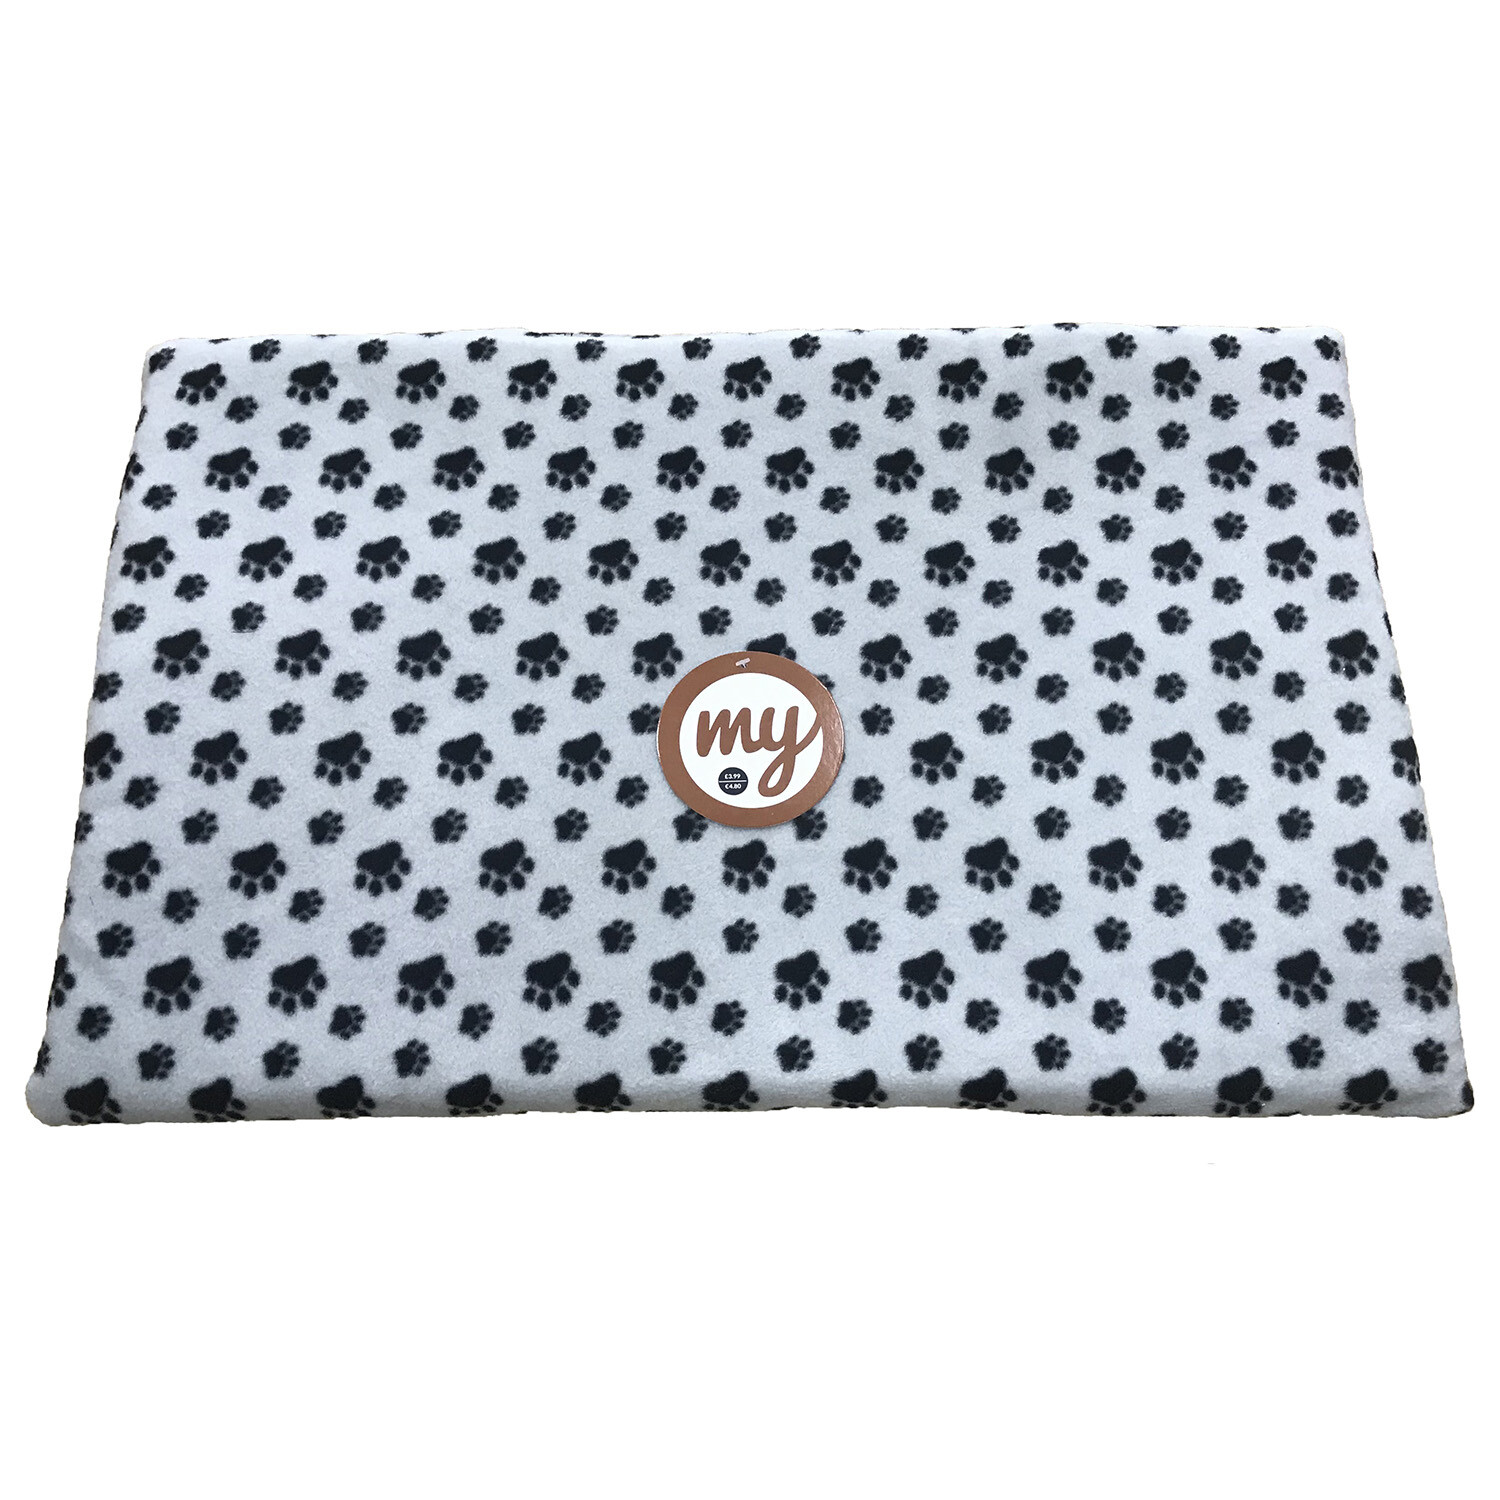 Single Paw and Heart Print Fleece Pet Blanket in Assorted styles Image 4